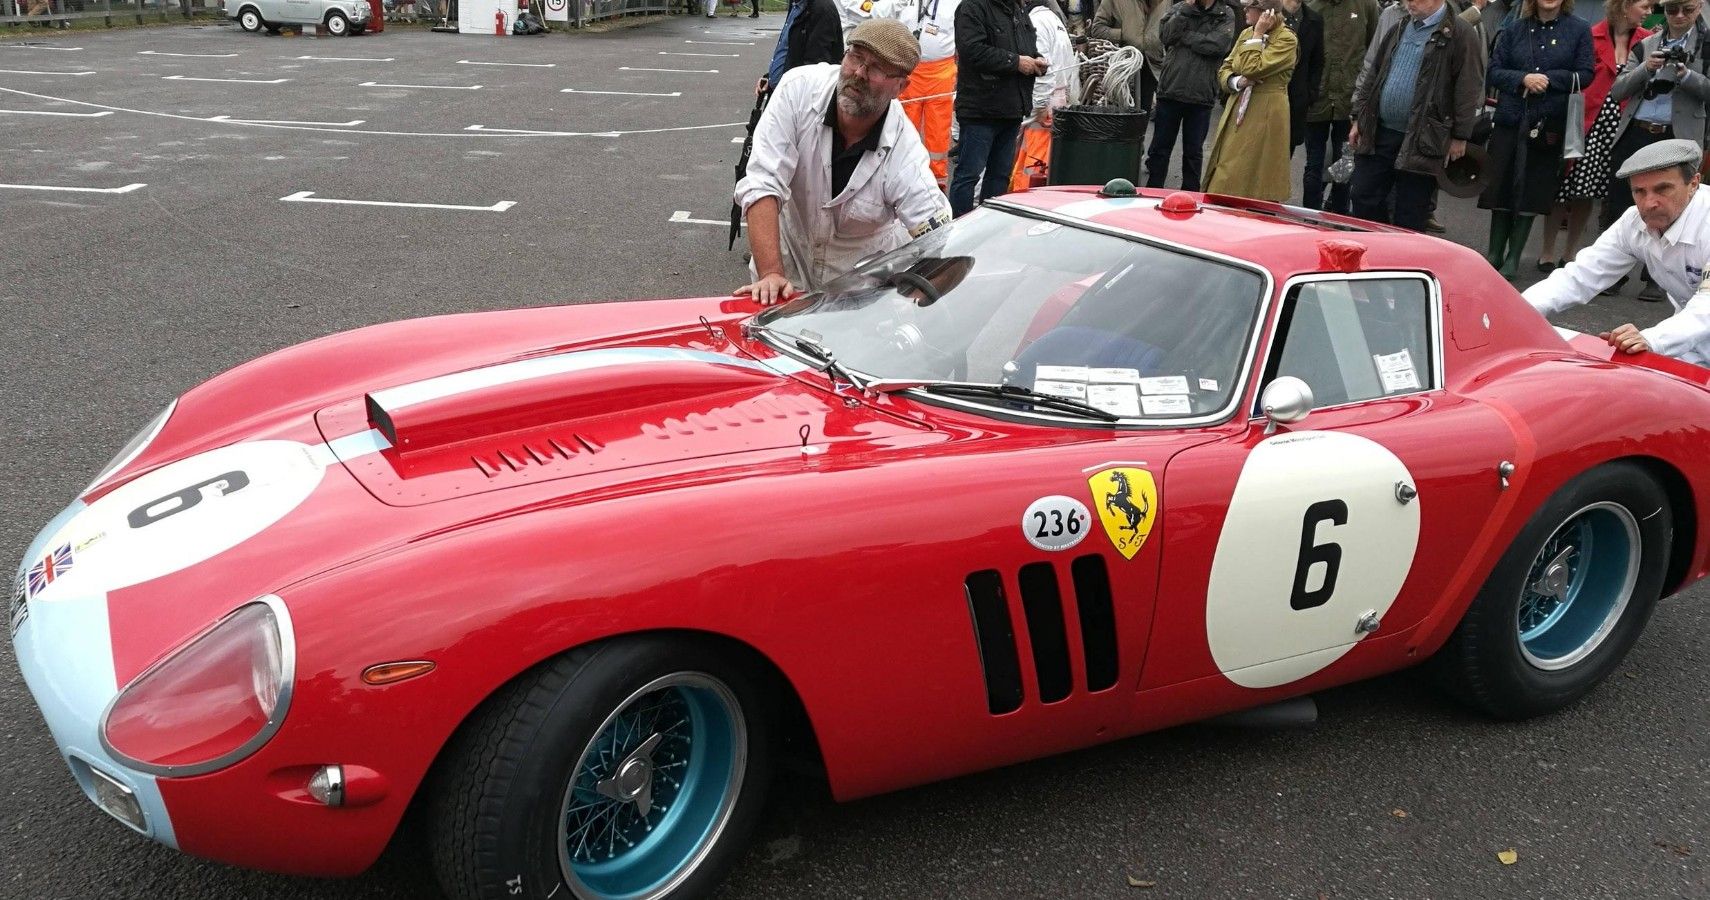 This rare expensive Ferrari had an expensive crack up during the Goodwood Revival.